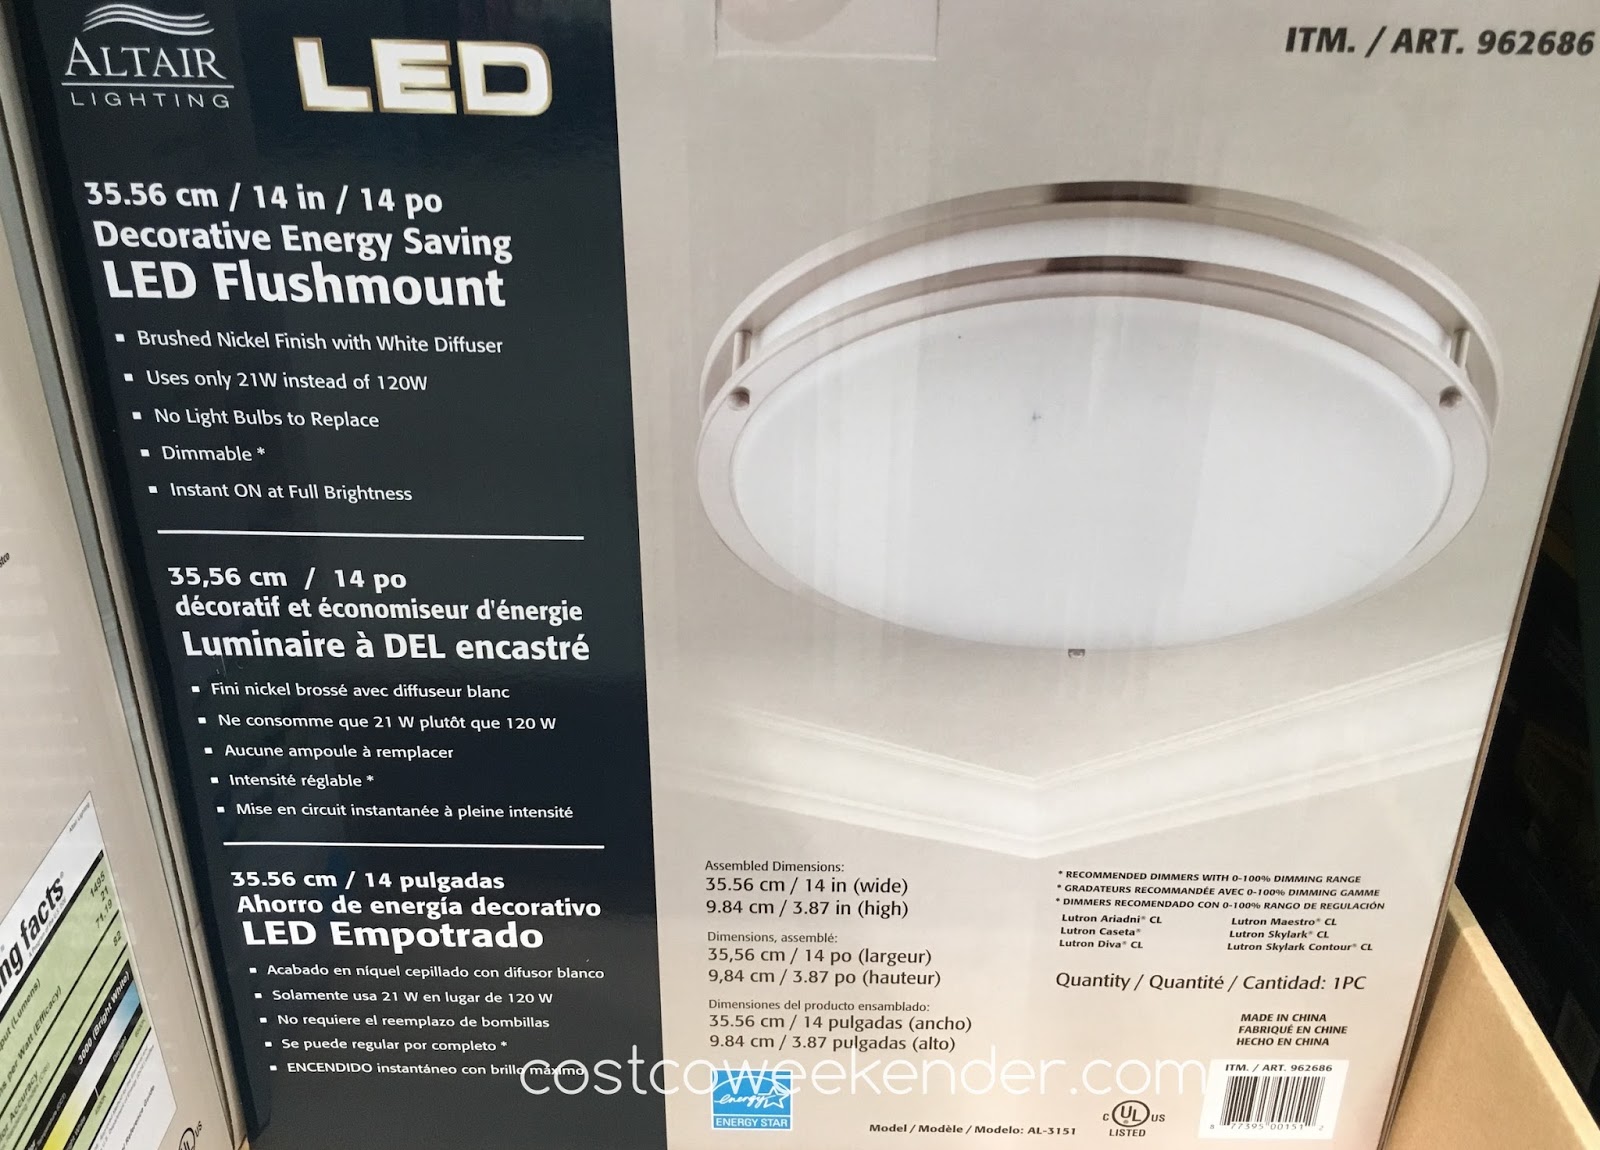 New Other Altair Lighting LED Flushmount 14" Dimmable Brushed Nickel 